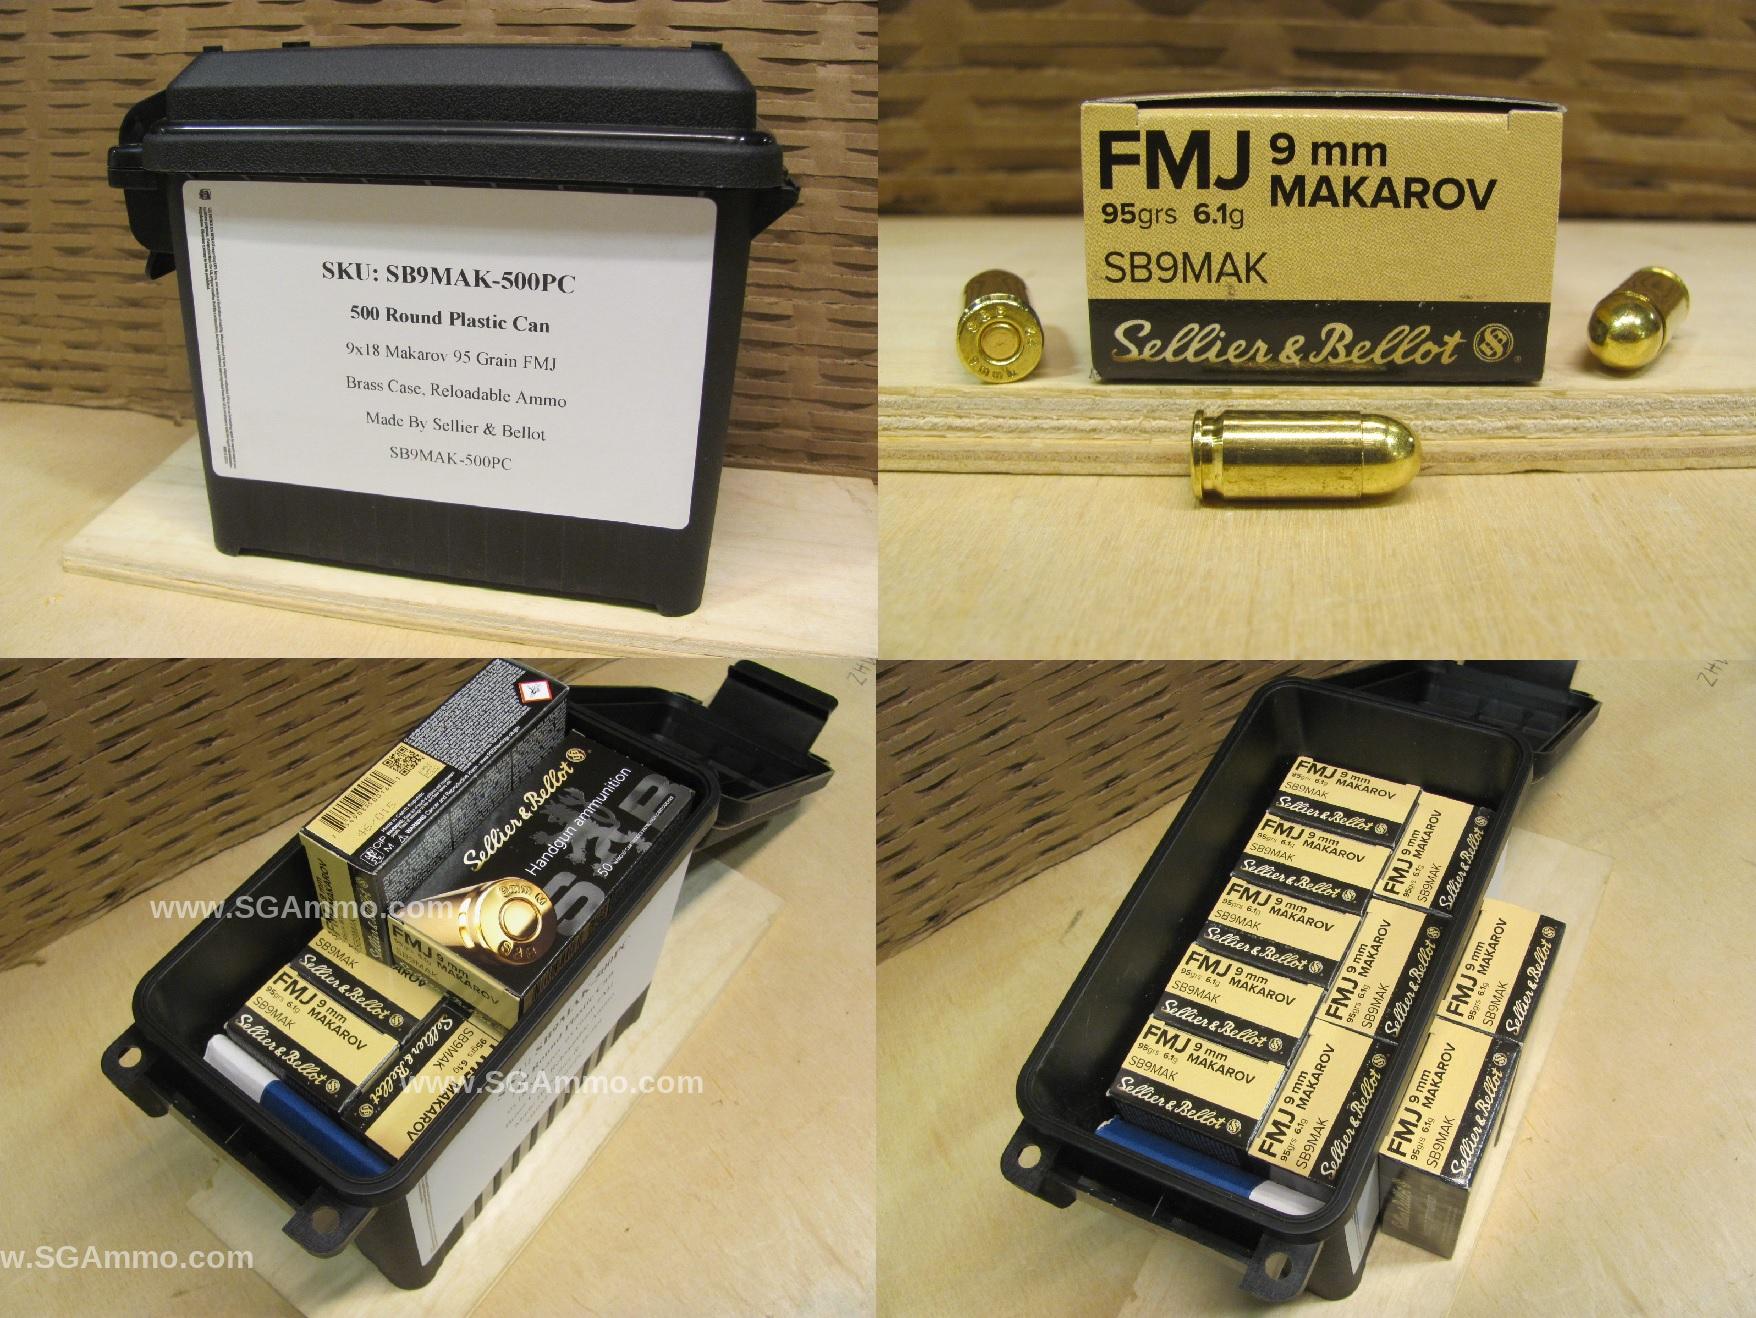 500 Round Plastic Can - 9x18 Makarov Brass Case FMJ Sellier Bellot Ammo - SB9MAK - Packed in Plastic Canister